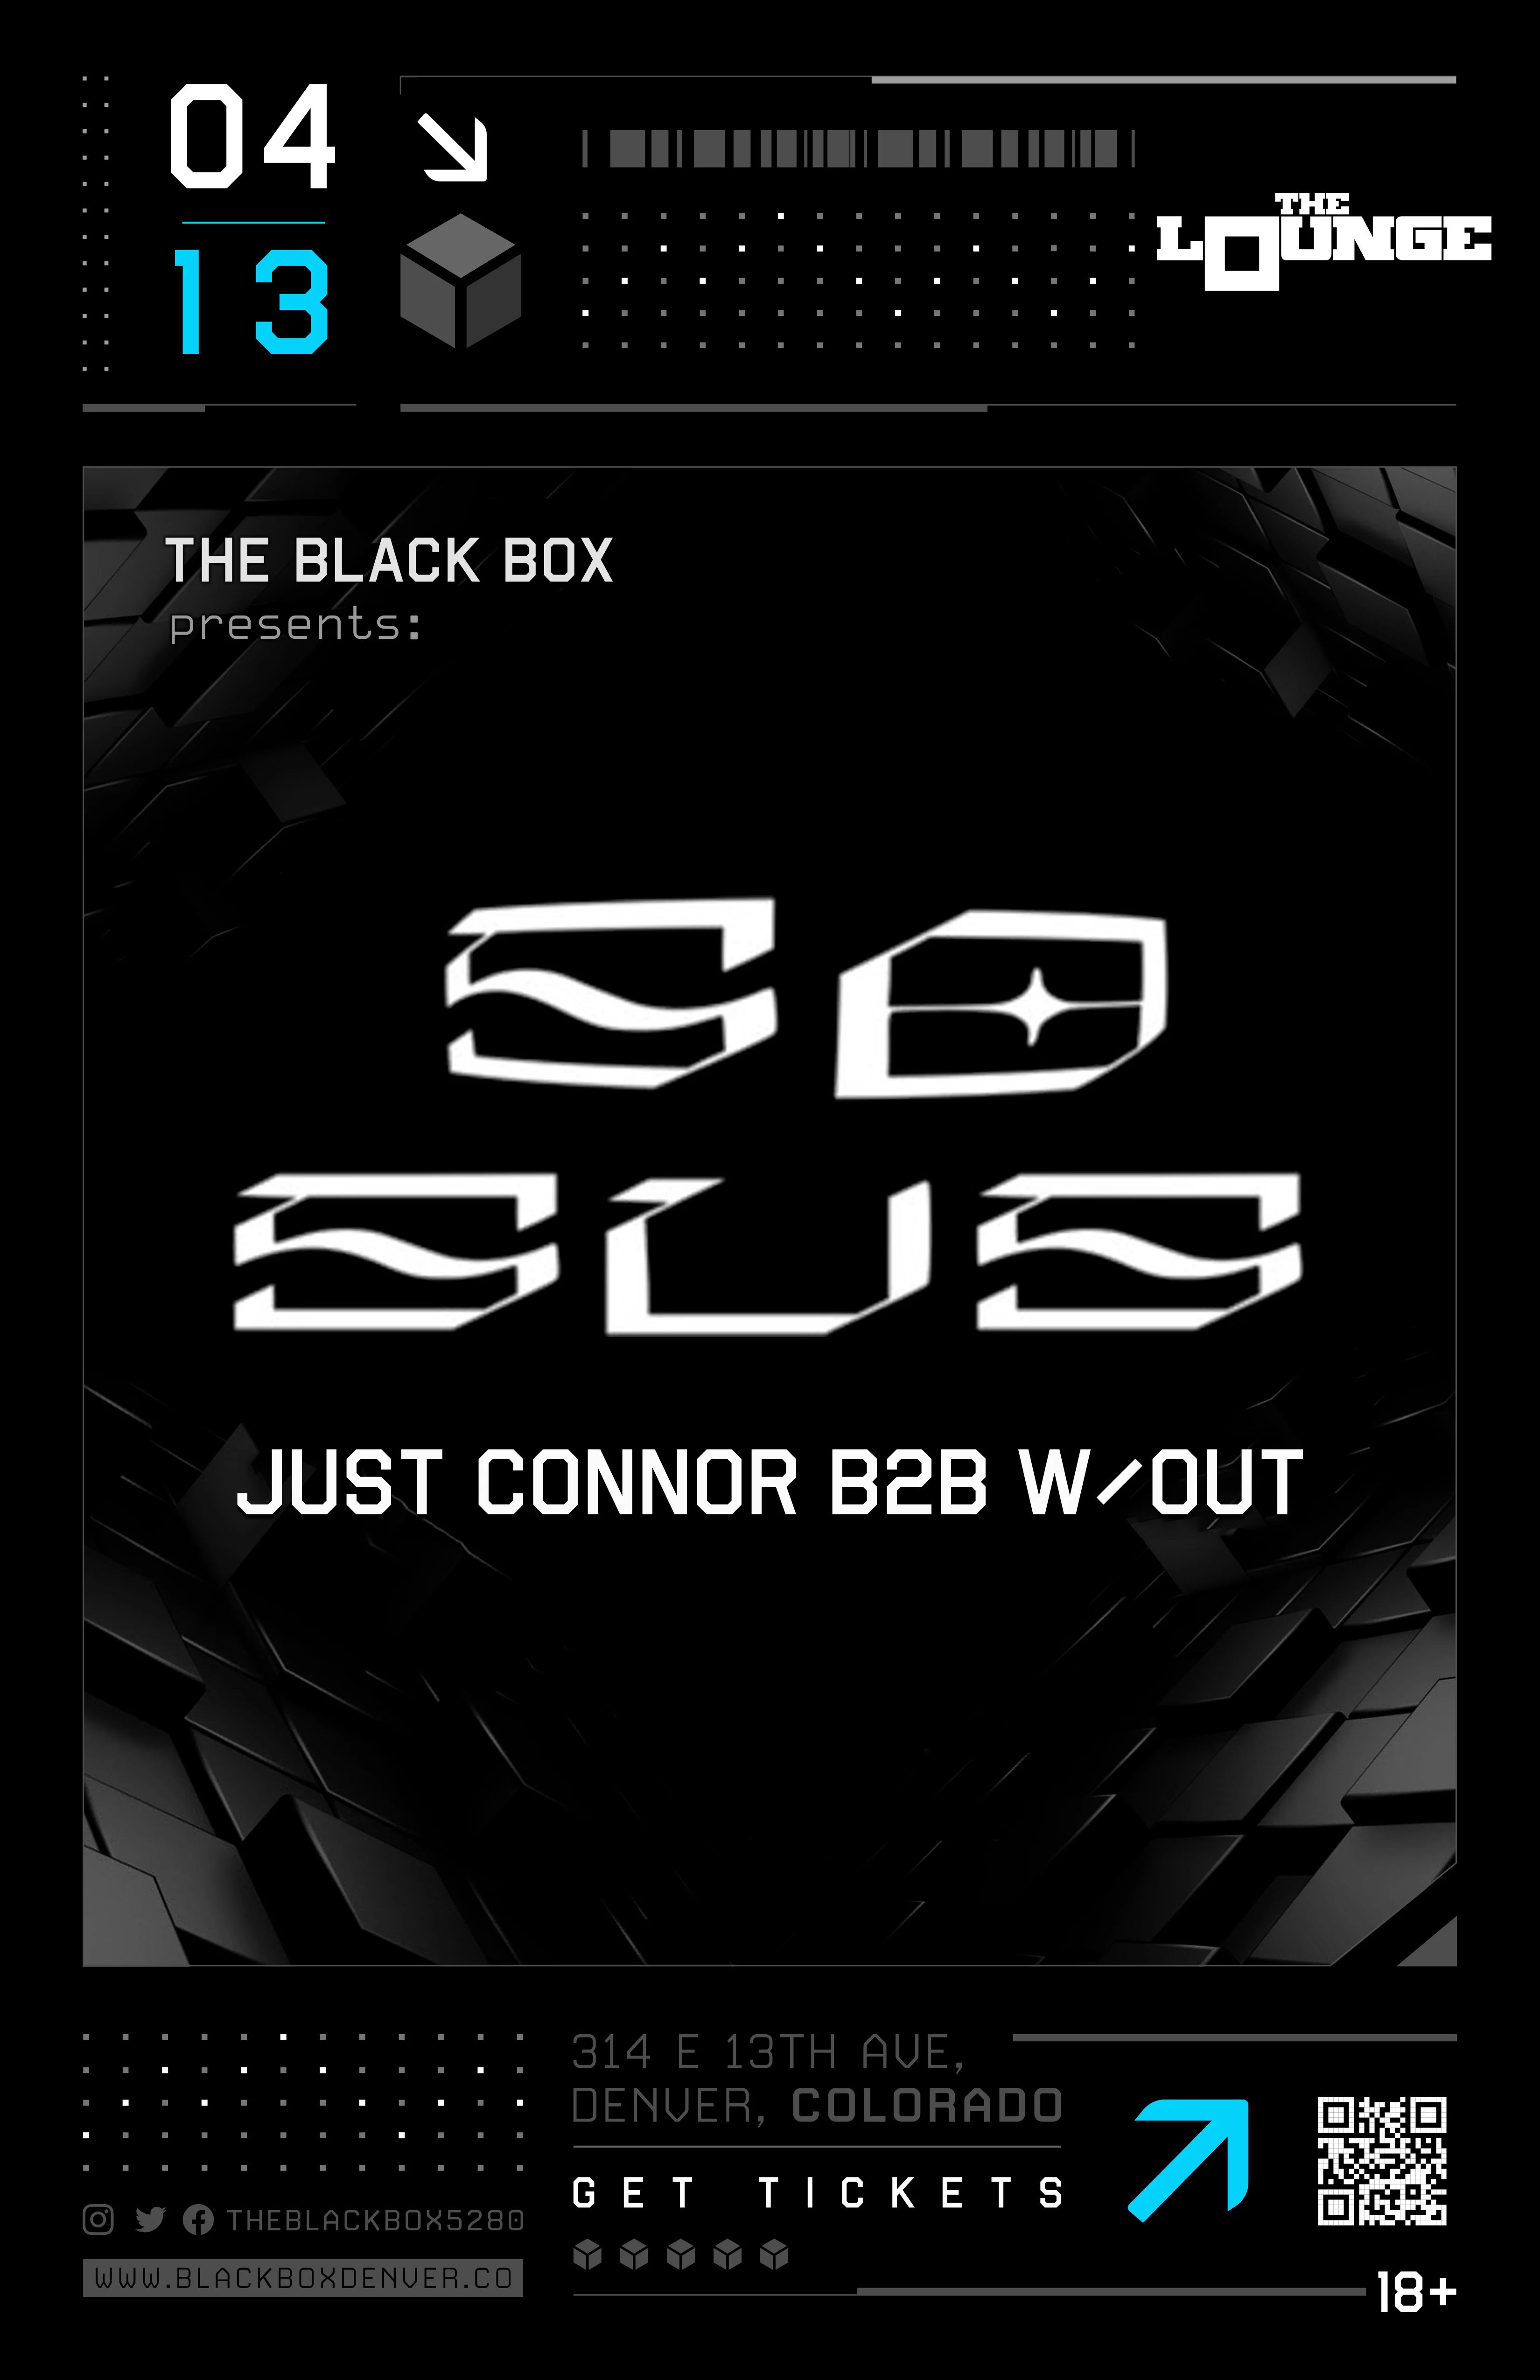 The Black Box presents: So Sus w/ Just Connor B2B w/out (18+)